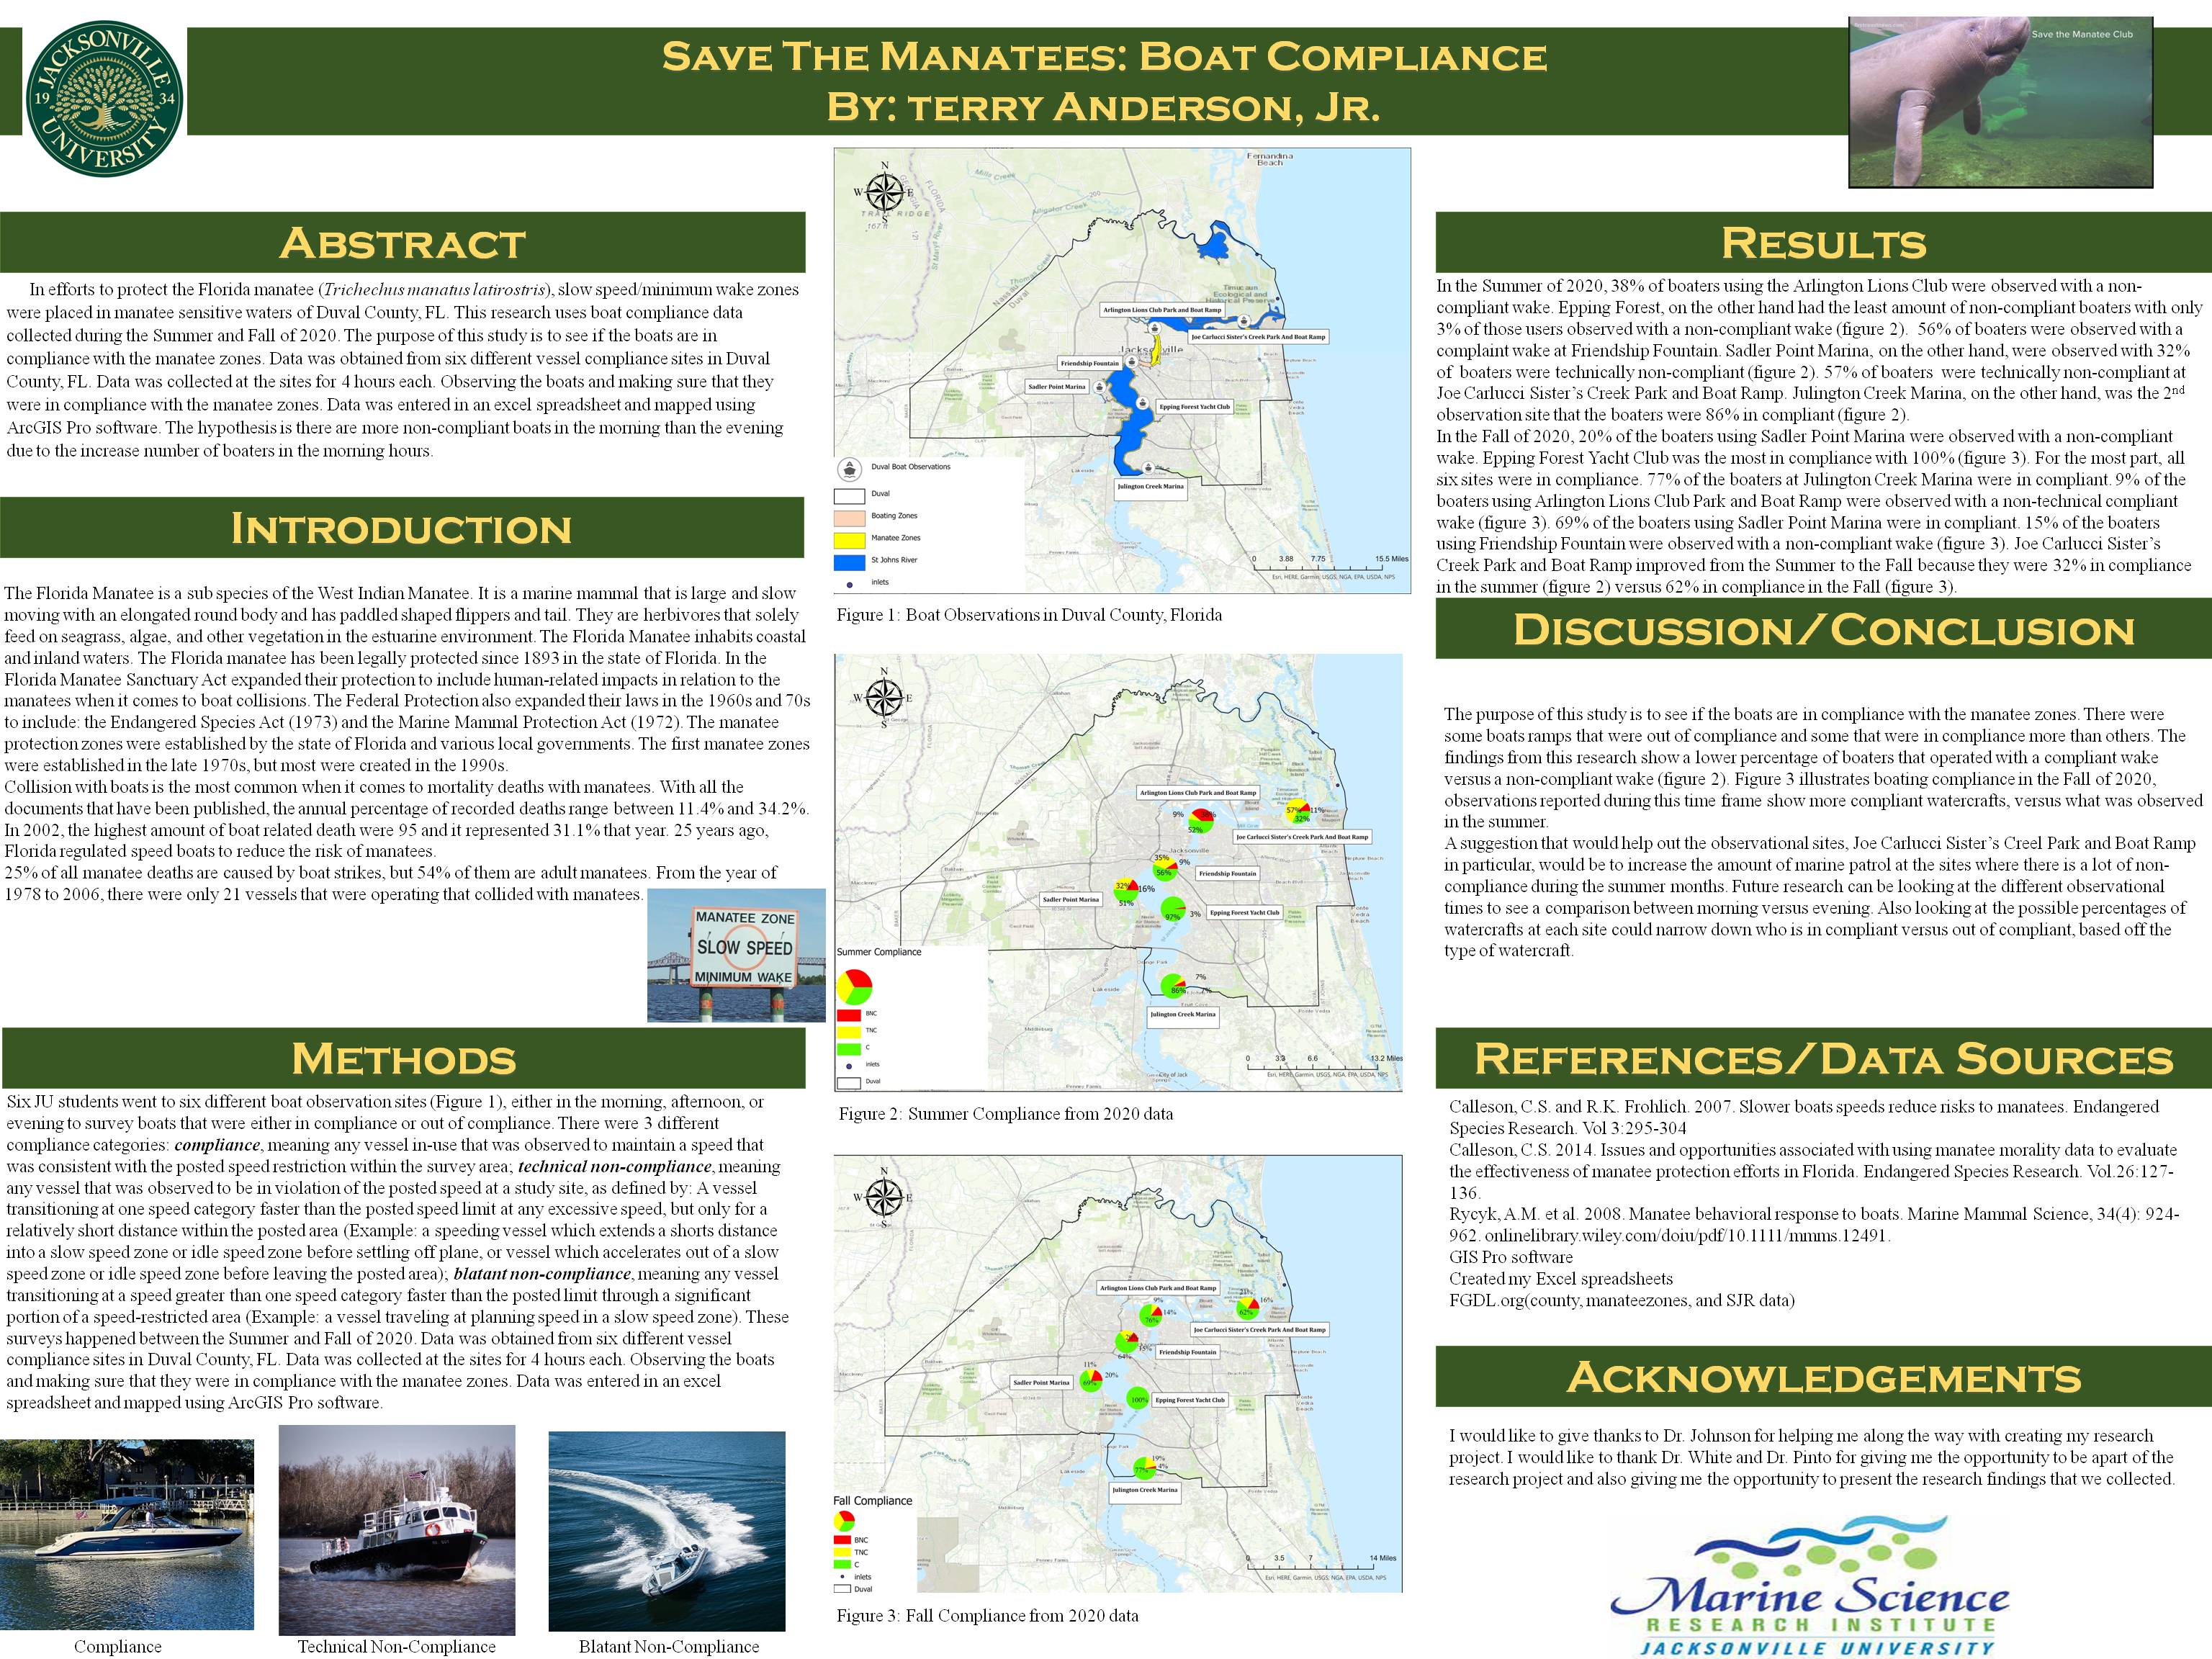 Showcase Image for Save the Manatees: Boat Compliance